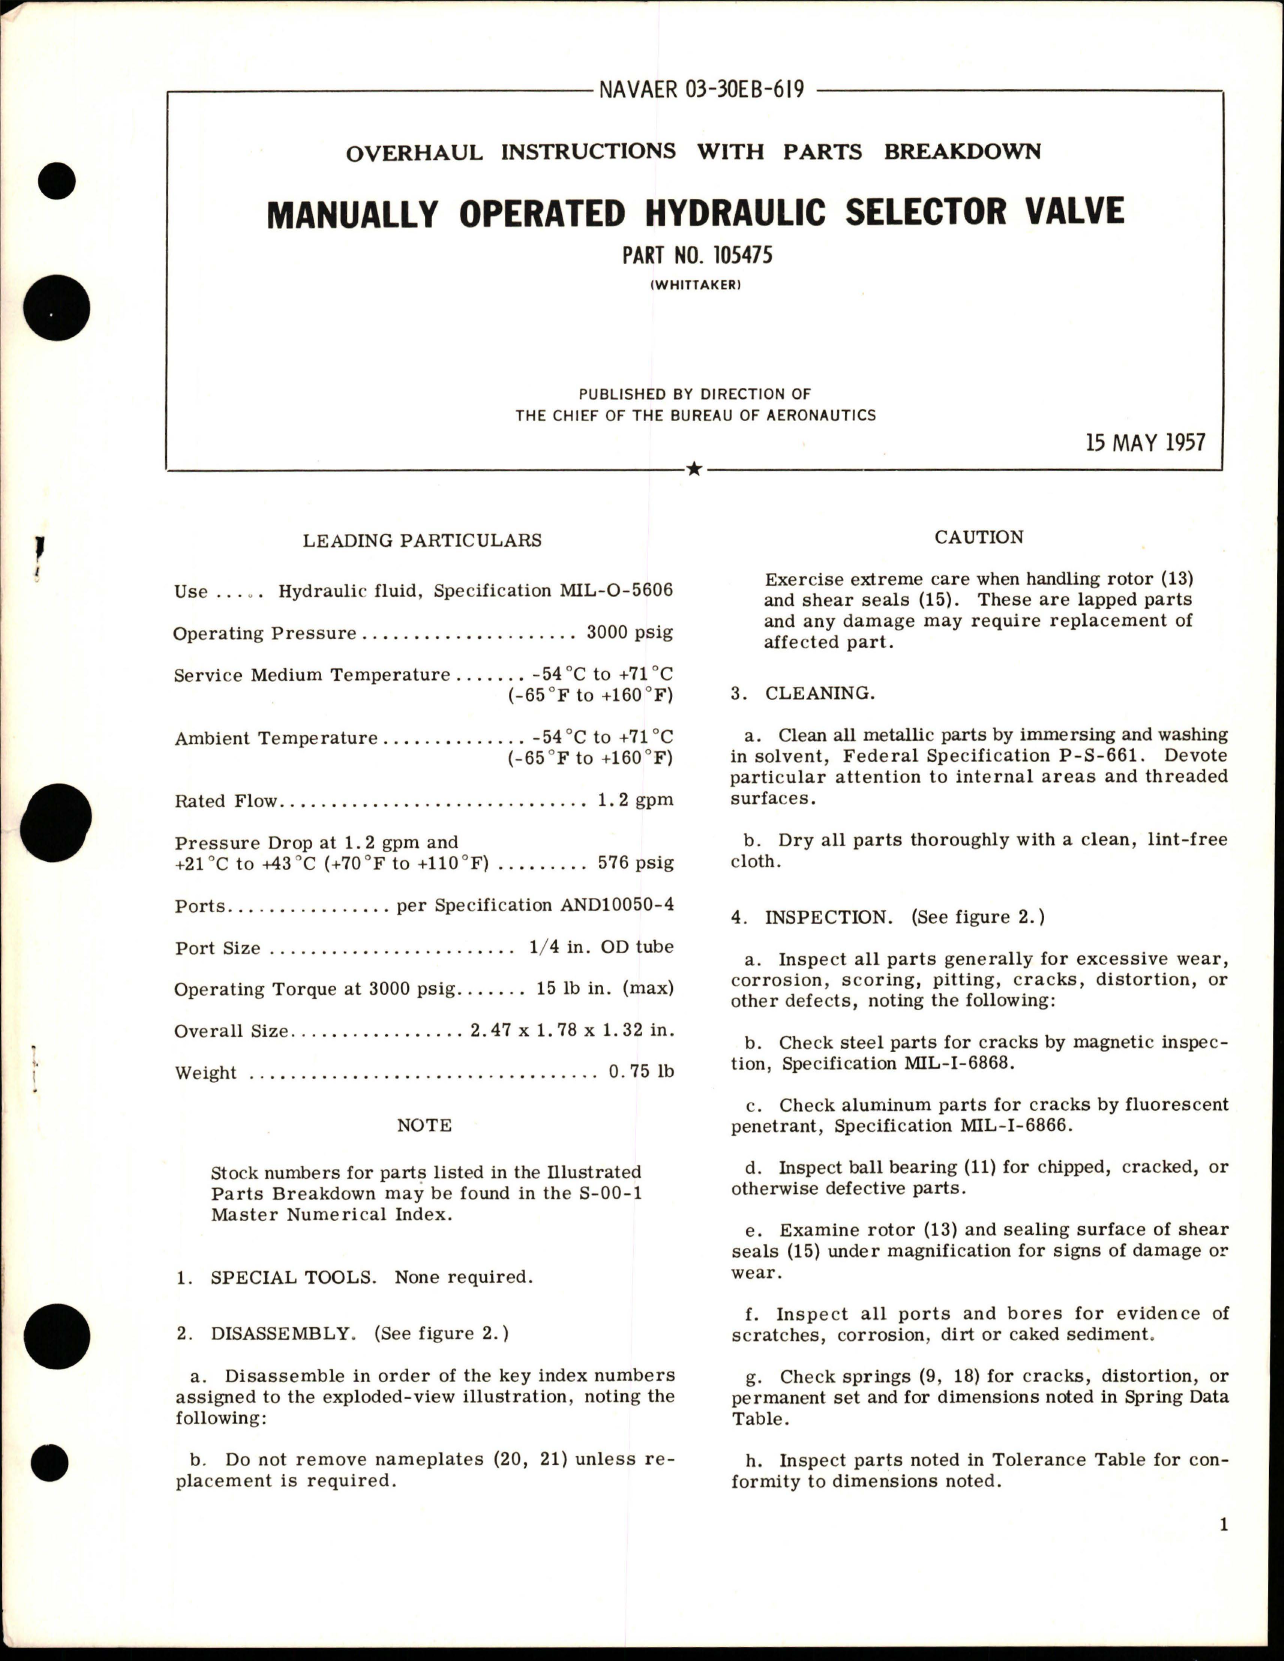 Sample page 1 from AirCorps Library document: Overhaul Instructions with Parts Breakdown for Manually Operated Hydraulic Selector Valve - Part 105475